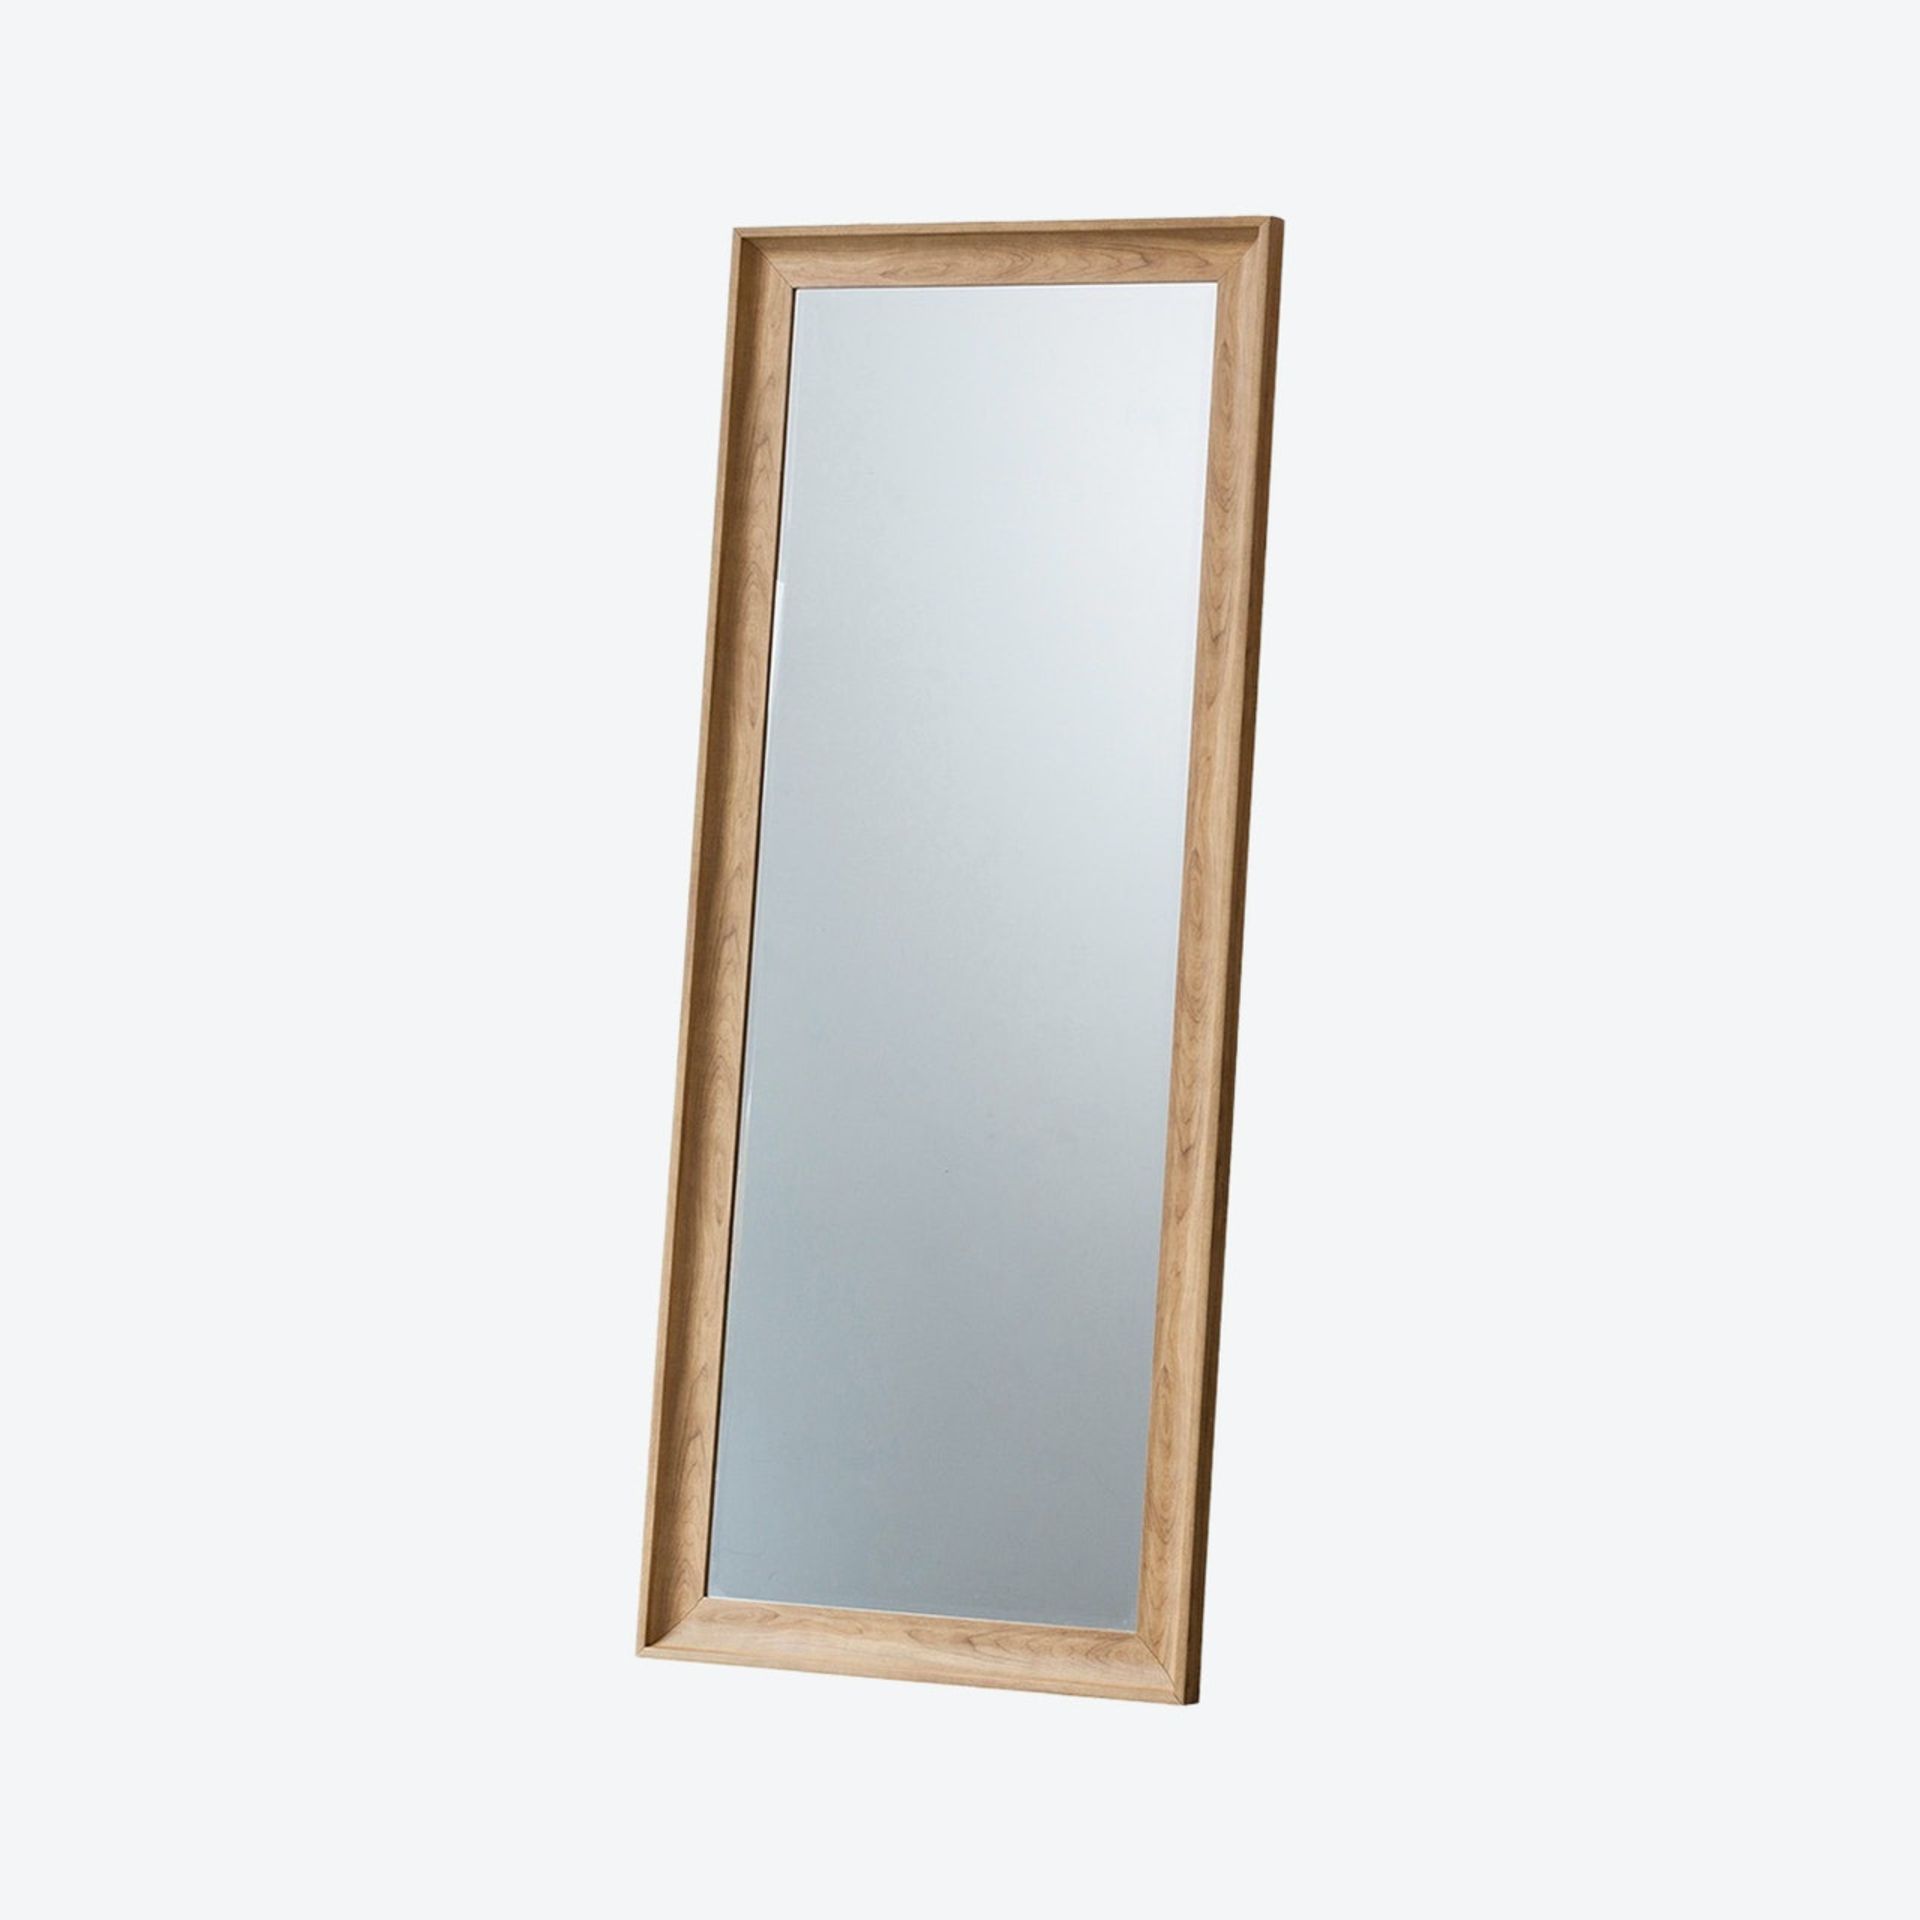 BOXED WOOD FRAMED LEANER MIRROR BATCH: PO21722/2010 RRP £149.00 (AS SEEN IN WAYFAIR)Condition